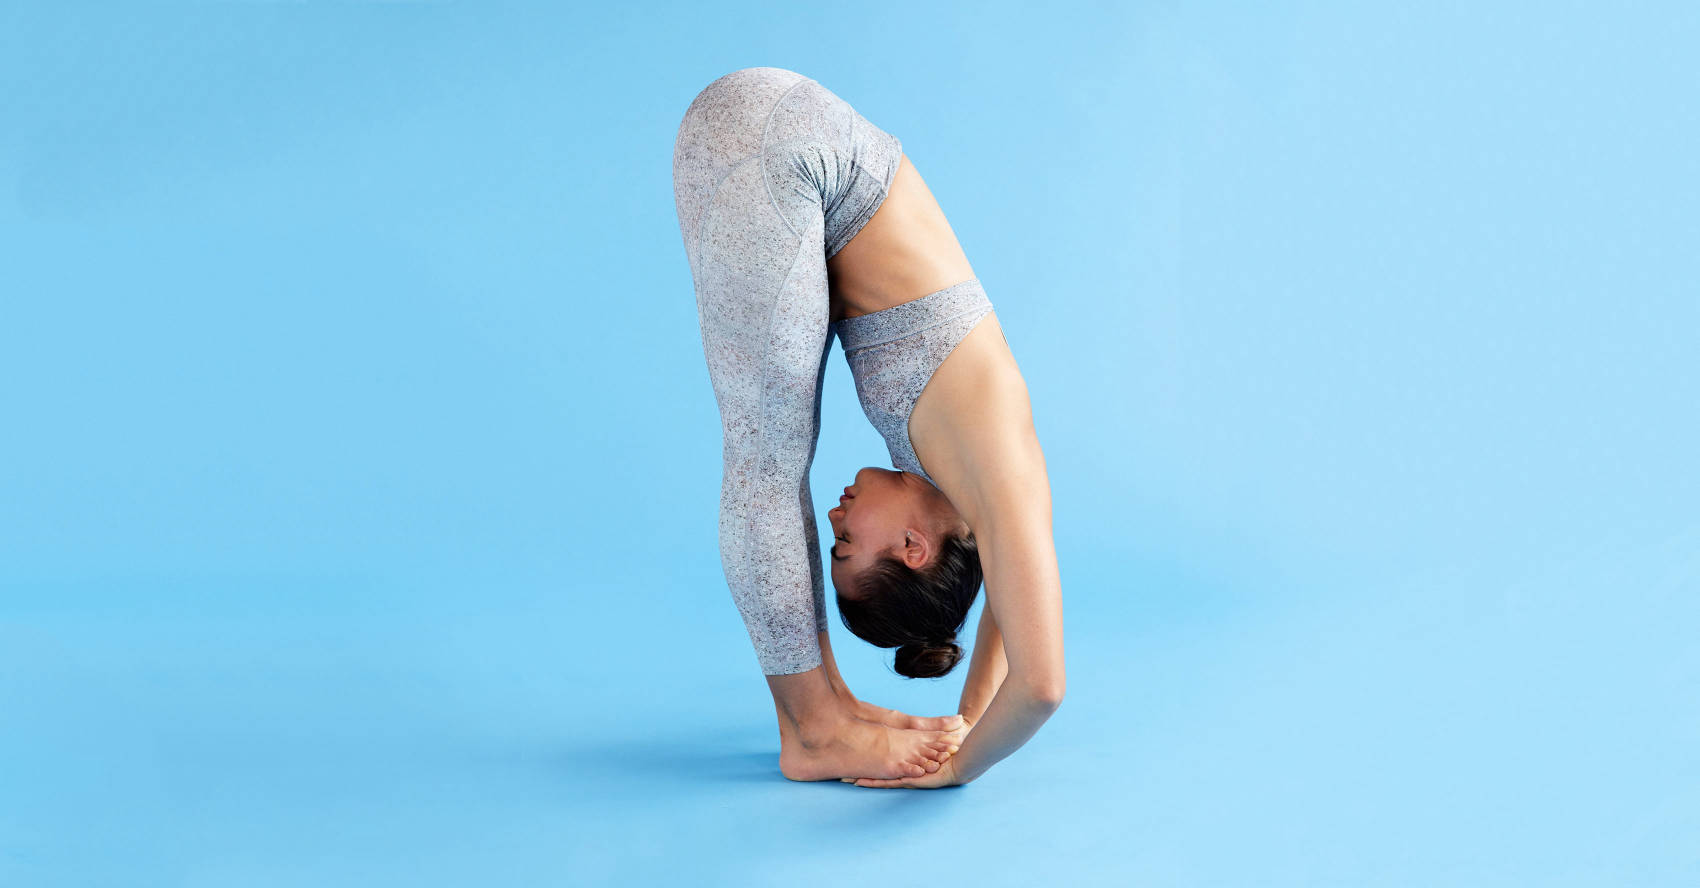 These 3 Moves Will Help You FINALLY Master Crow Pose | Women's Health